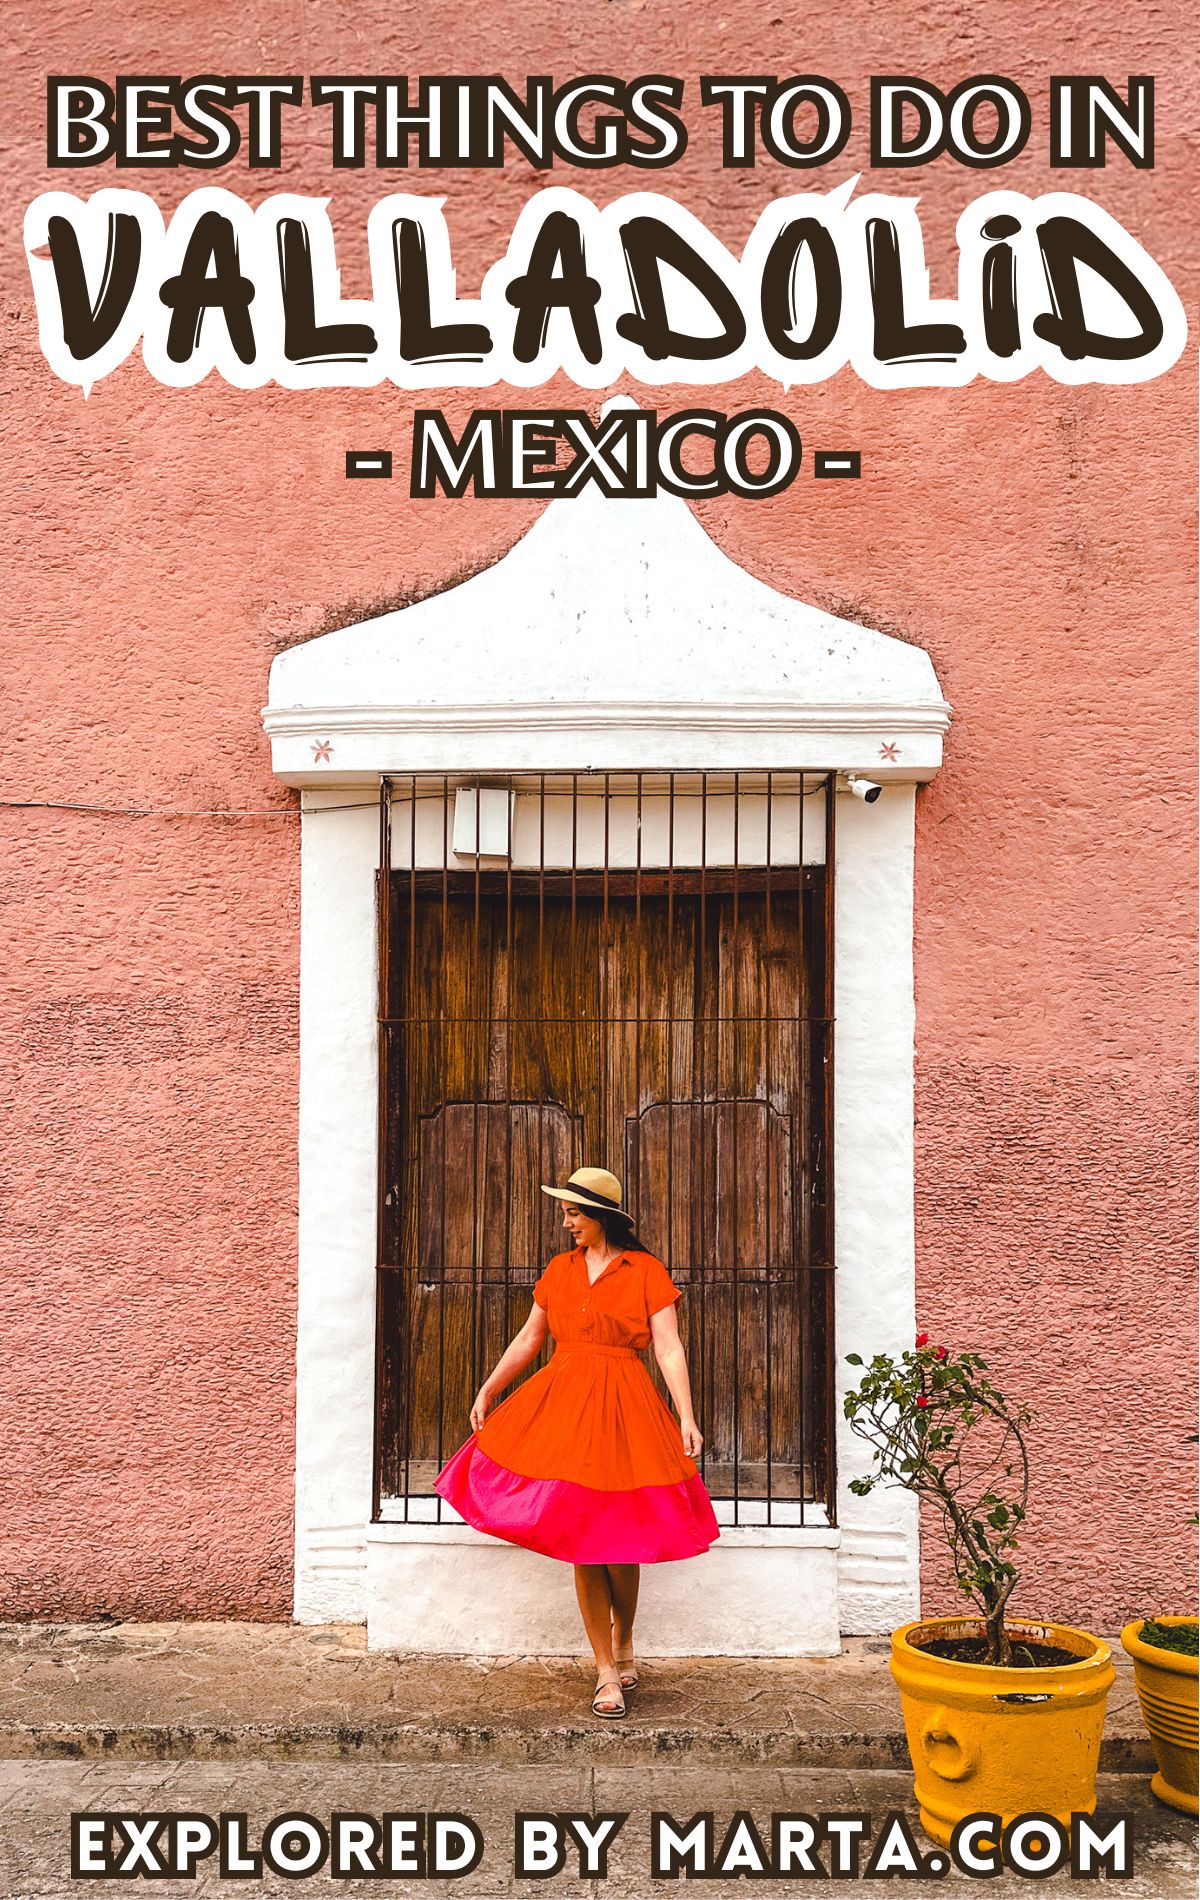 Valladolid, Mexico - best things to do in Valladolid, Mexico